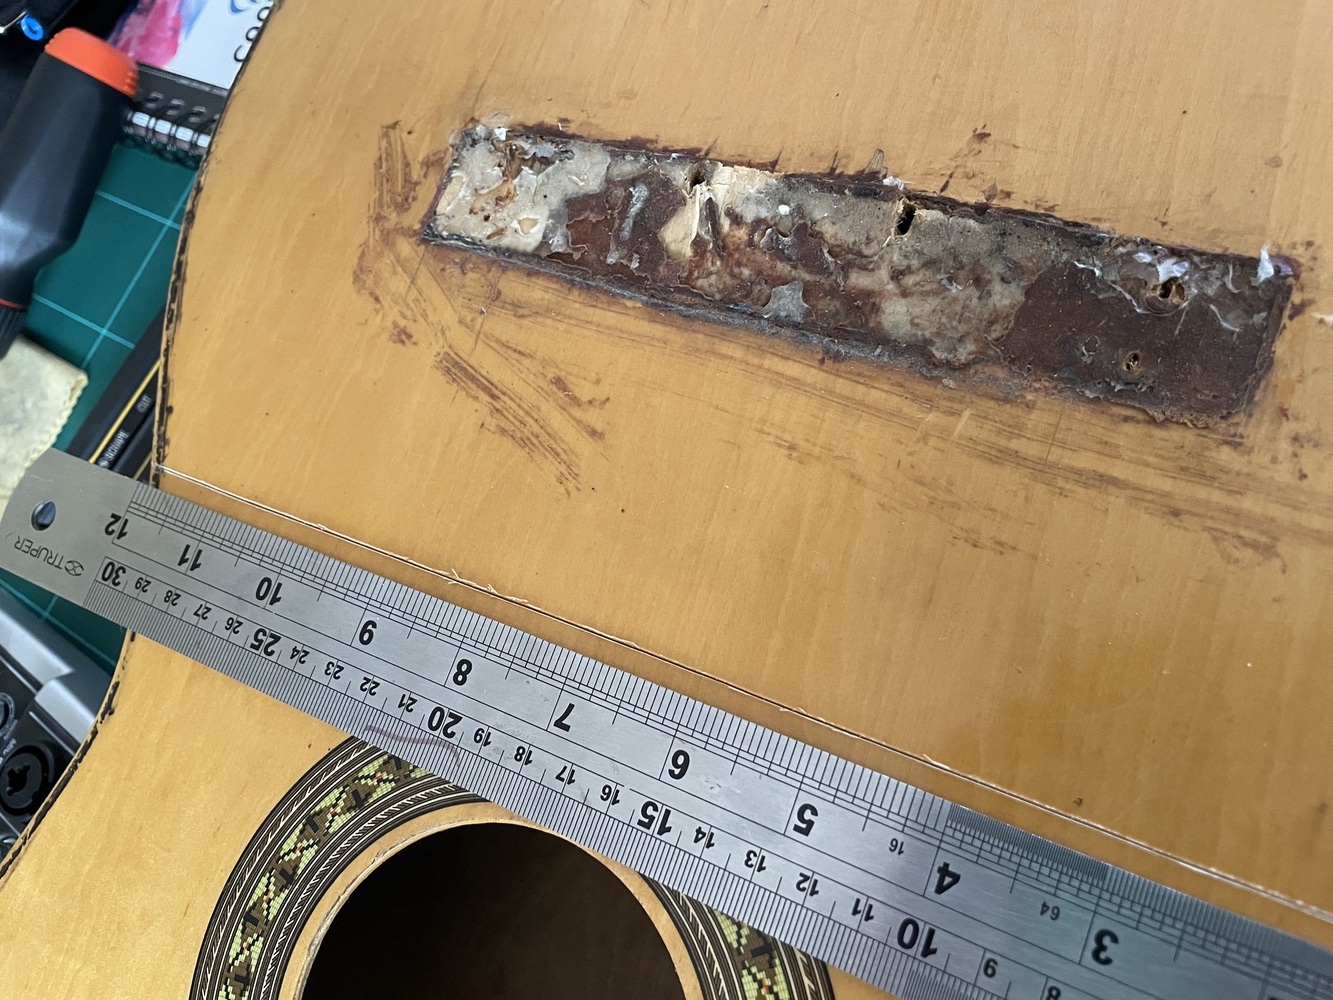 A ruler on the guitar showing where I cut it through